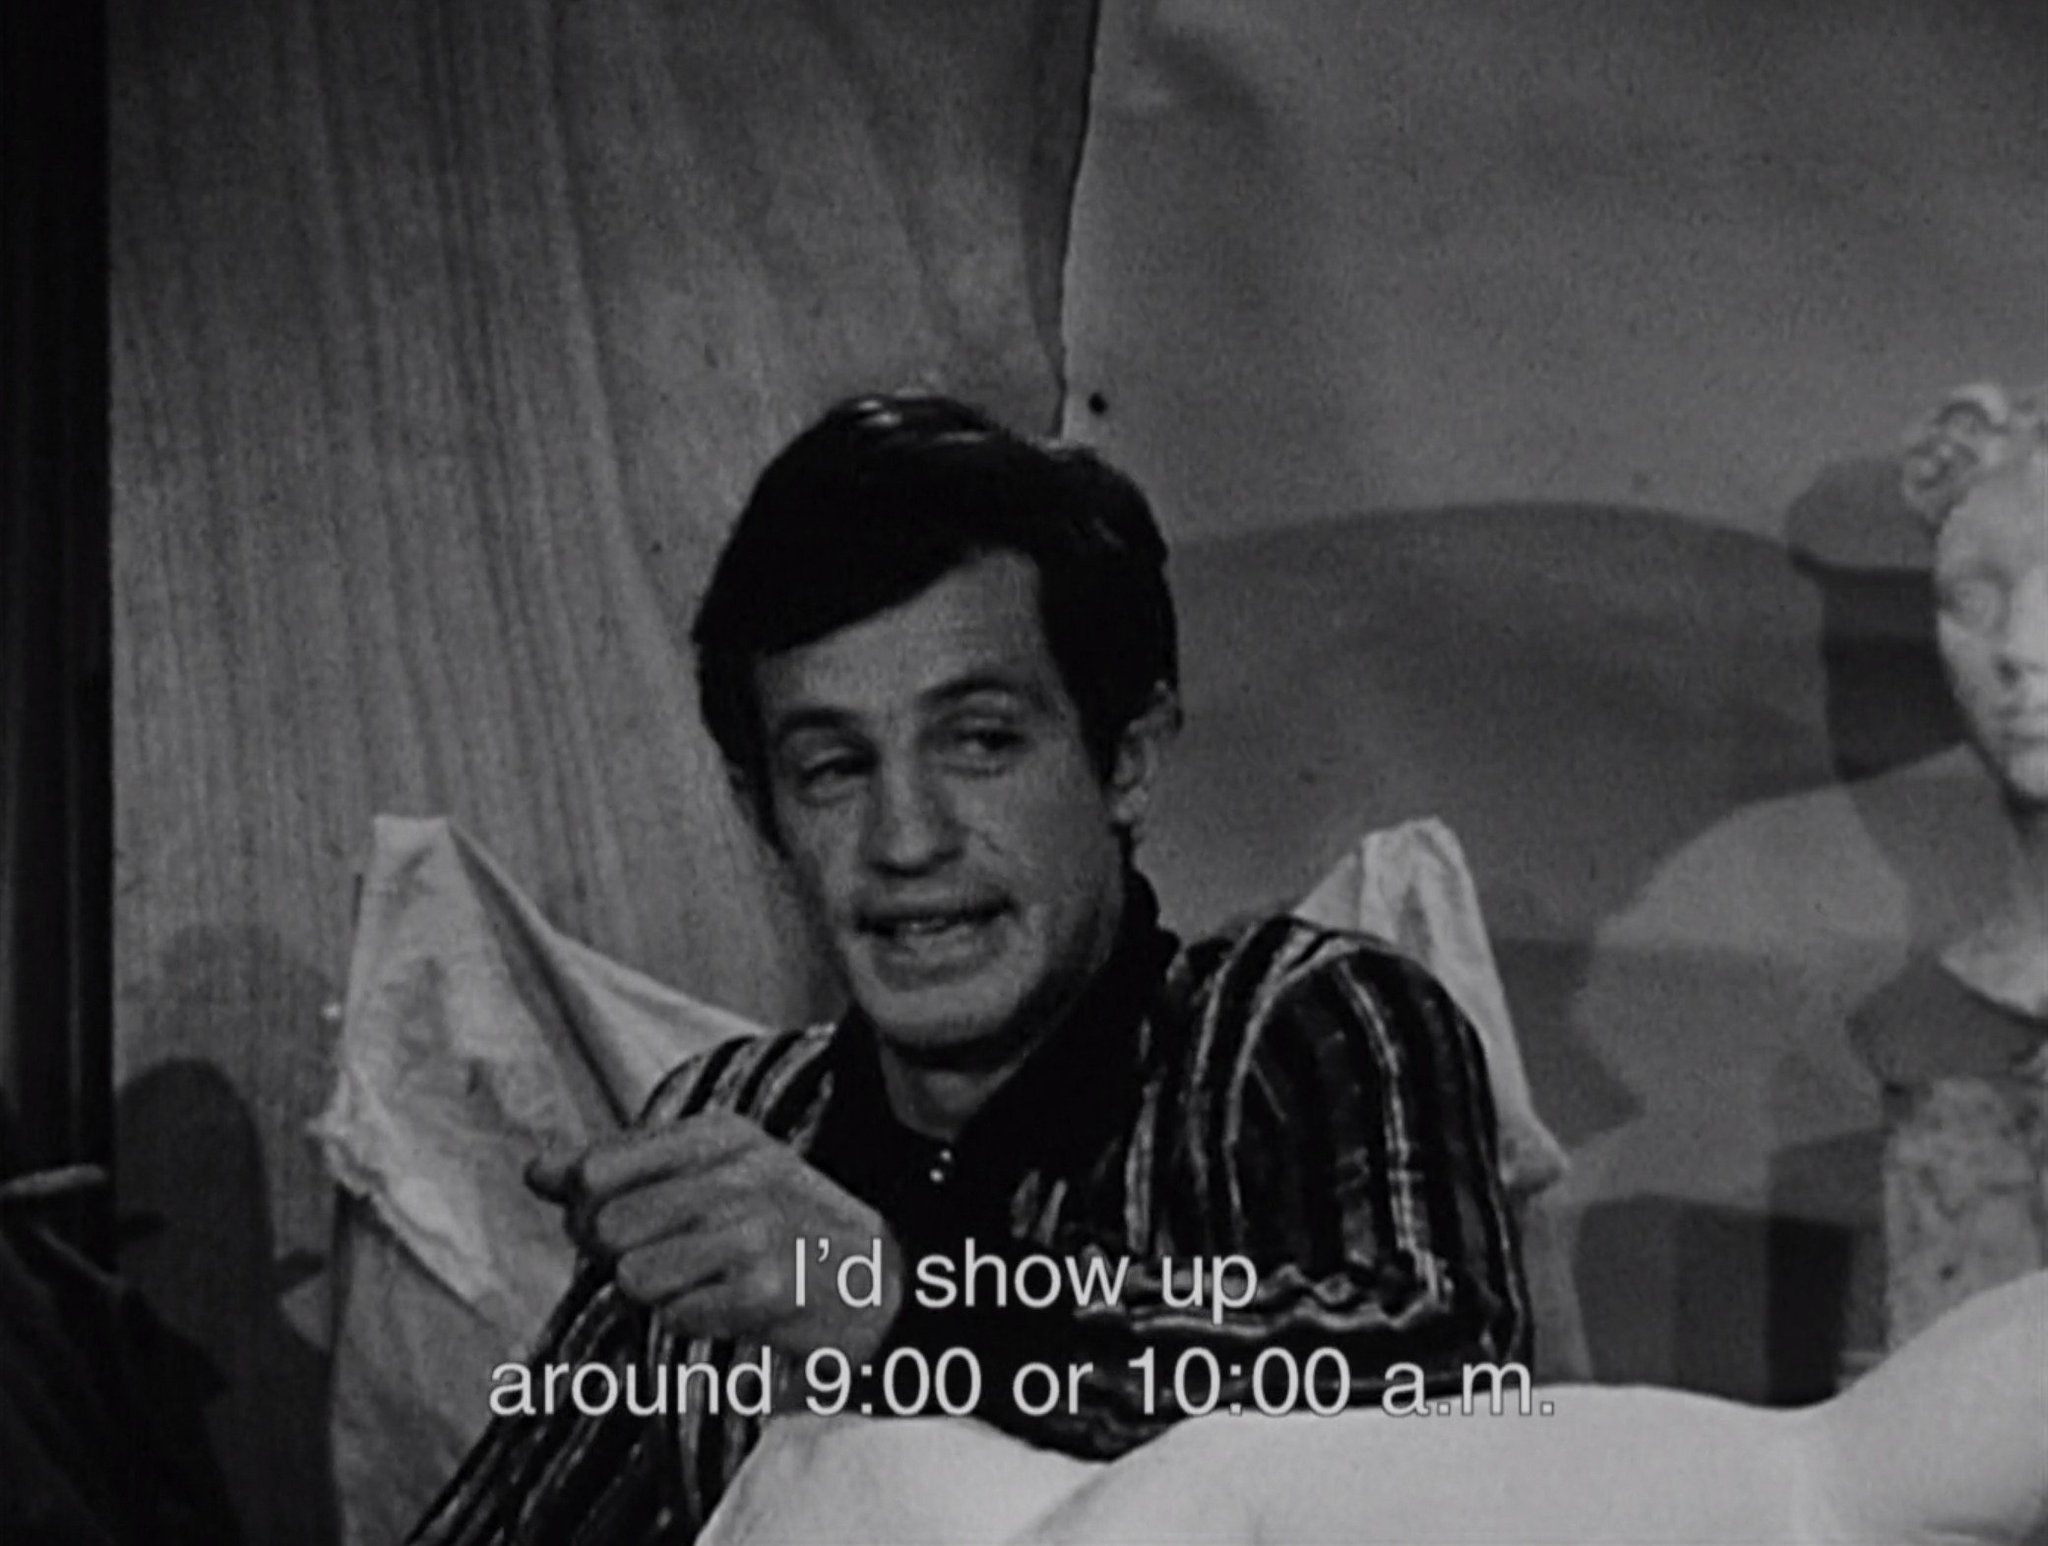 Happy birthday, Jean-Paul Belmondo! Here he is in the early 60s discussing his work with Godard 